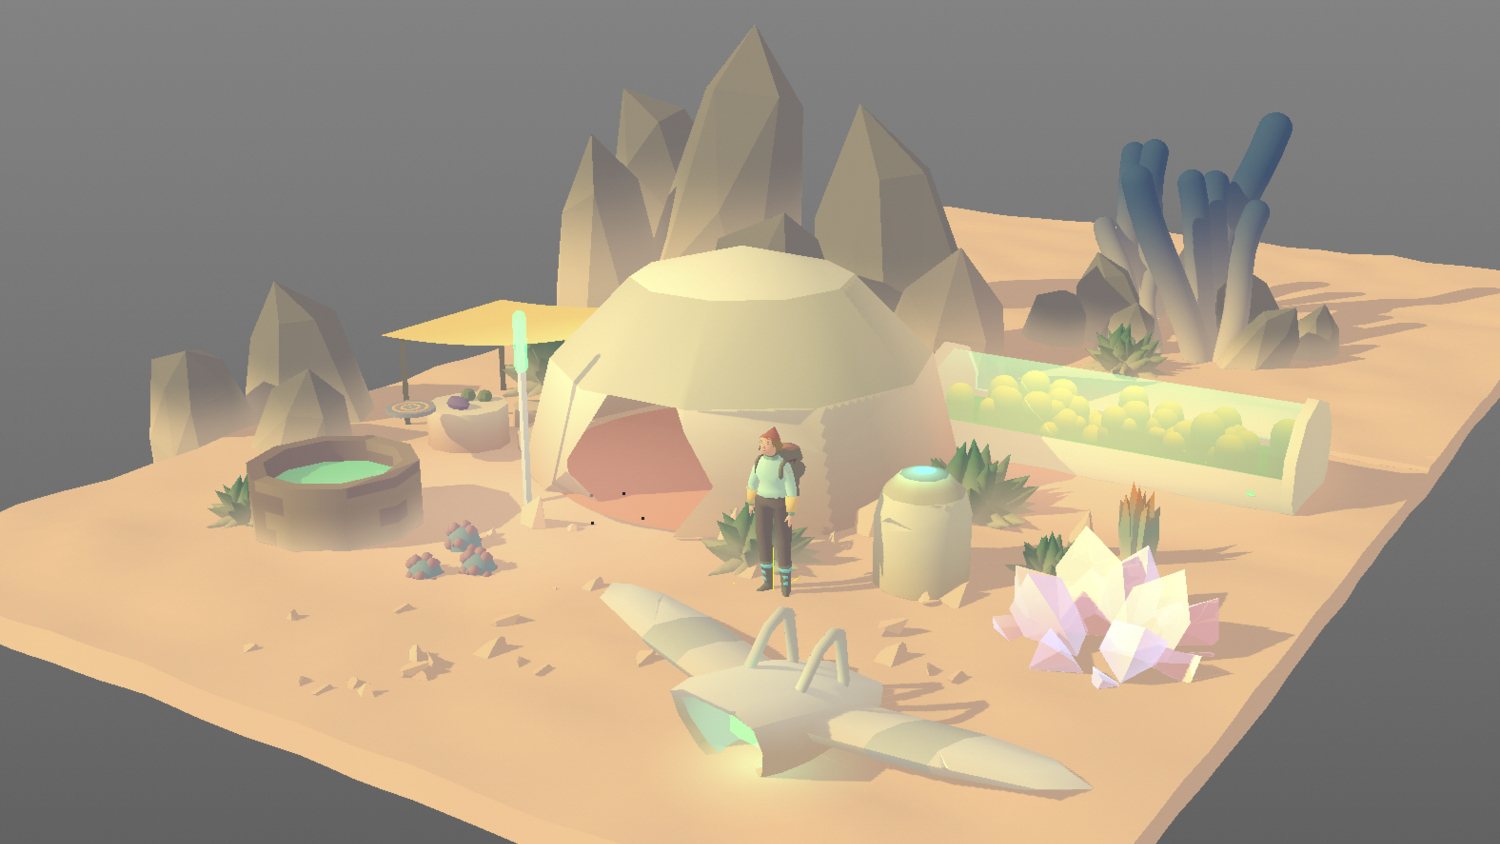 Seed Concept Art featuring 3D render of desert dwelling with villager